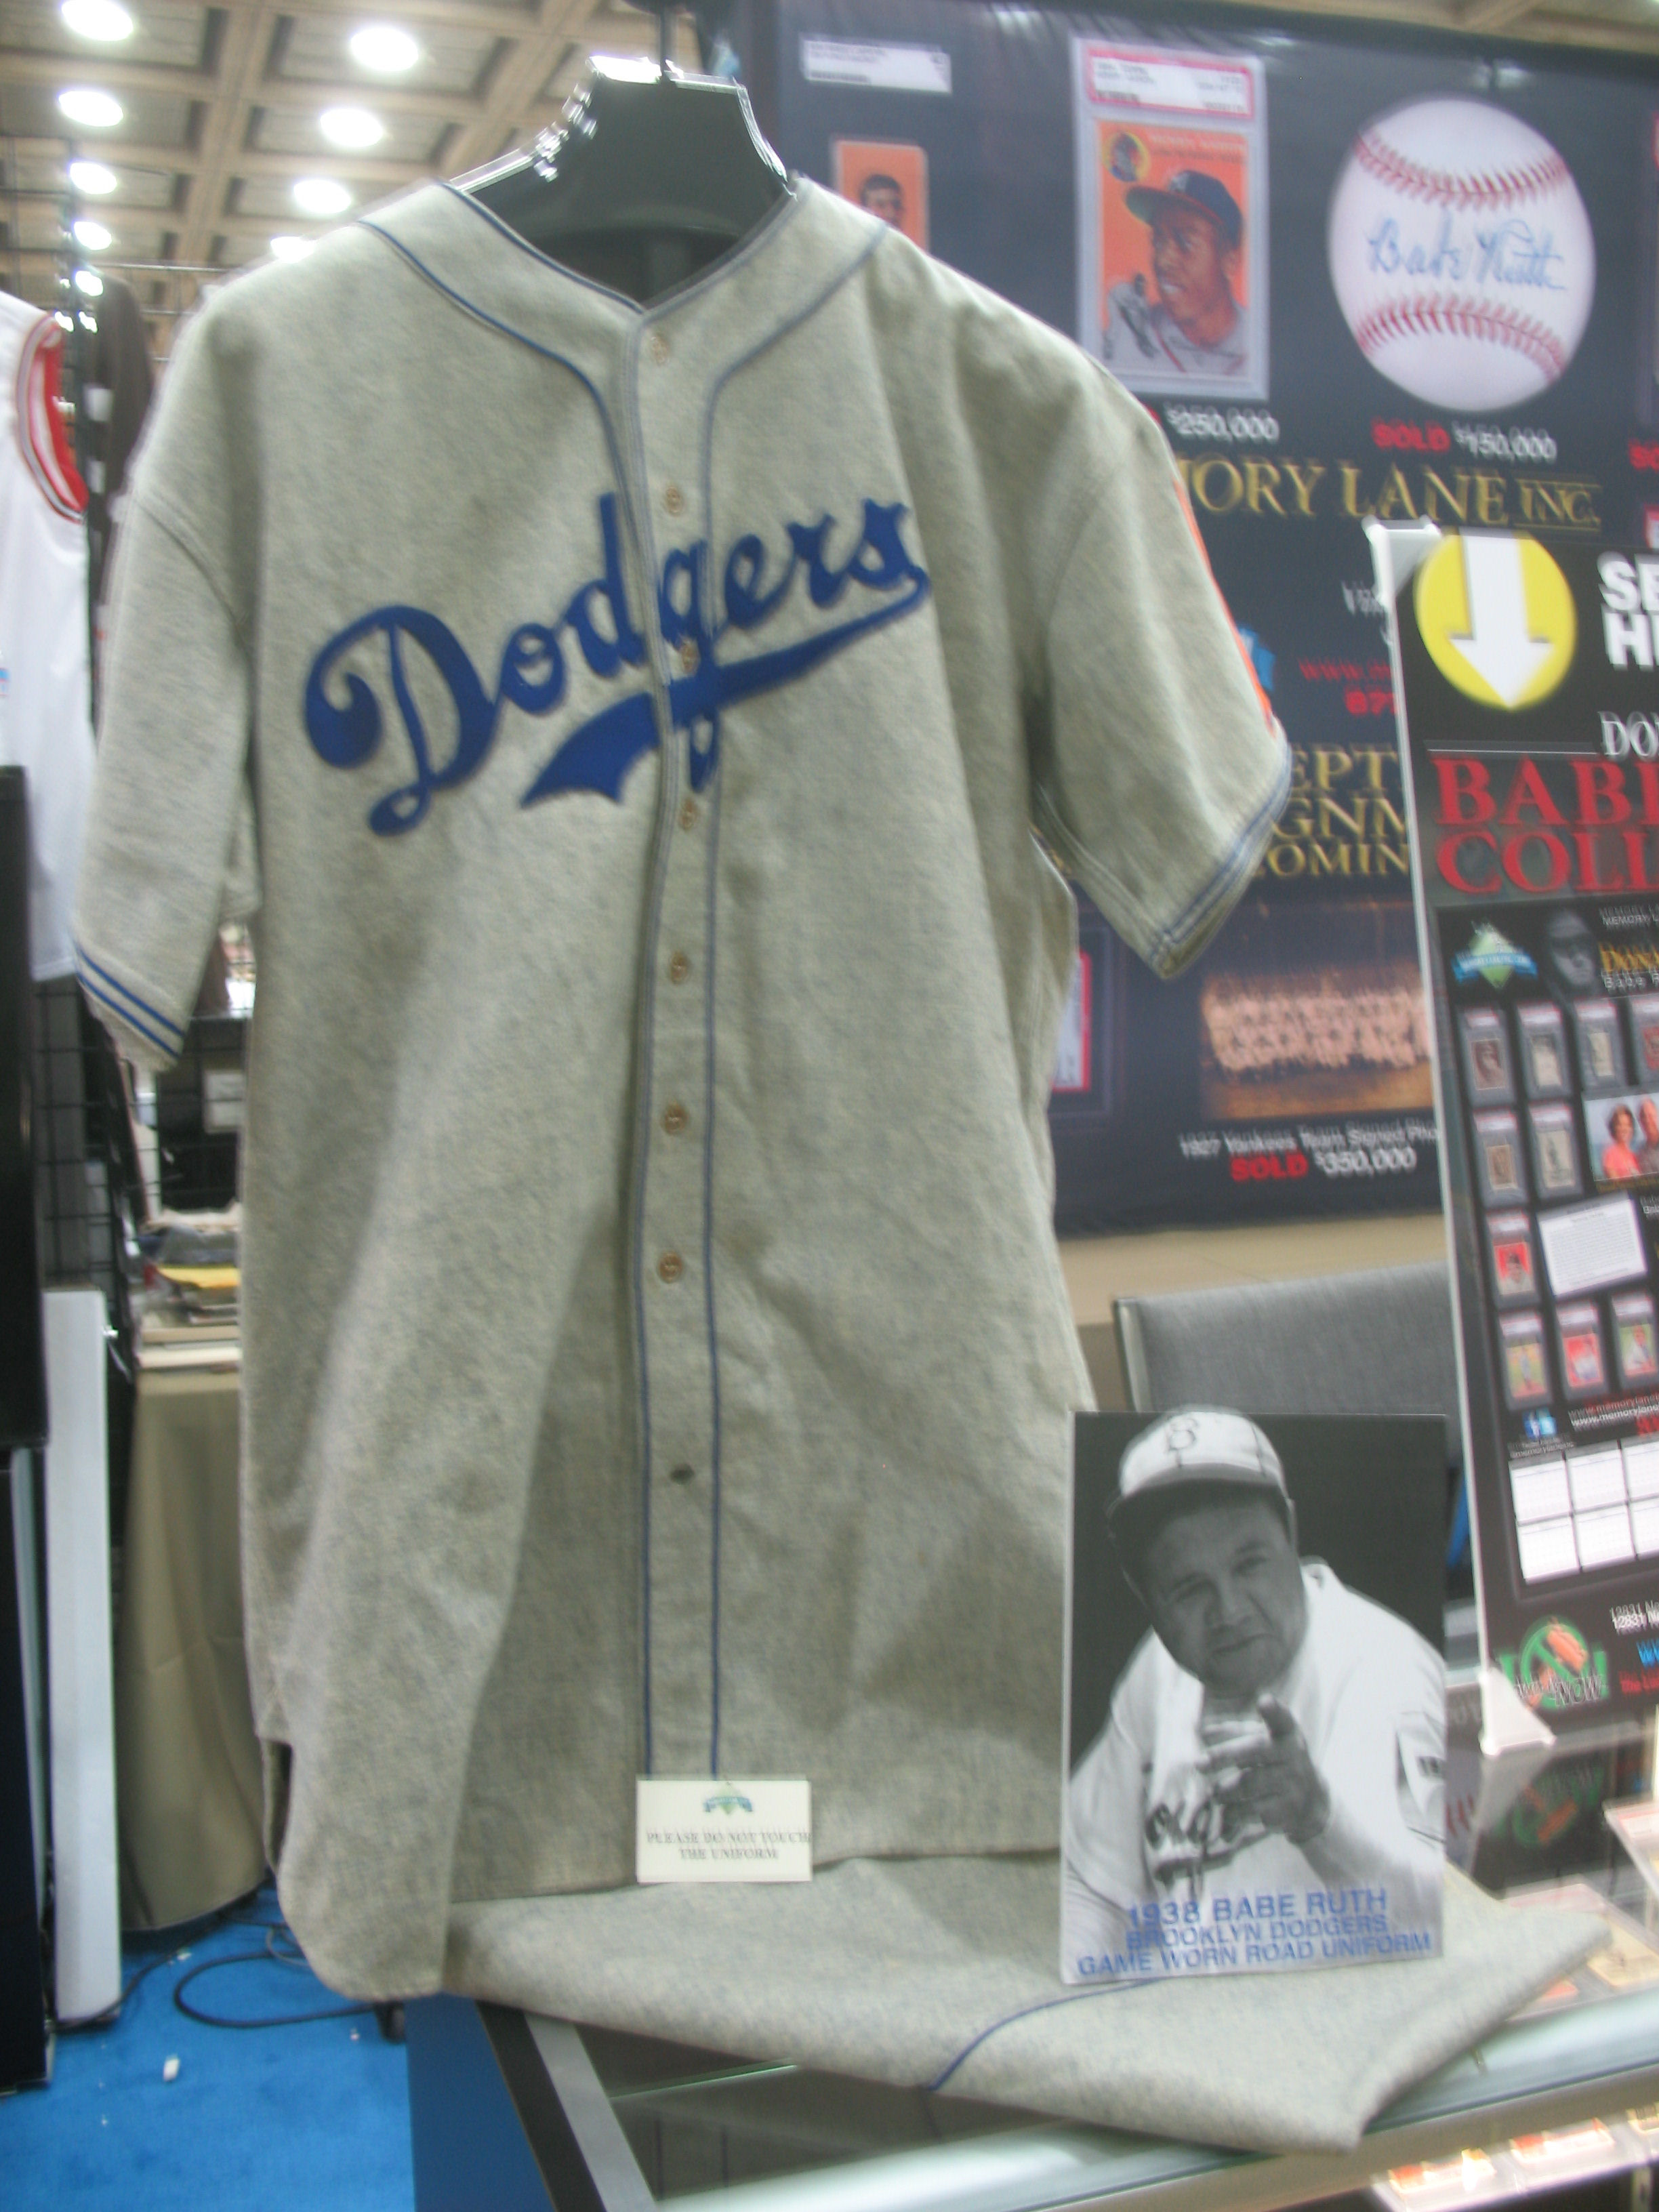 babe ruth brooklyn dodgers jersey